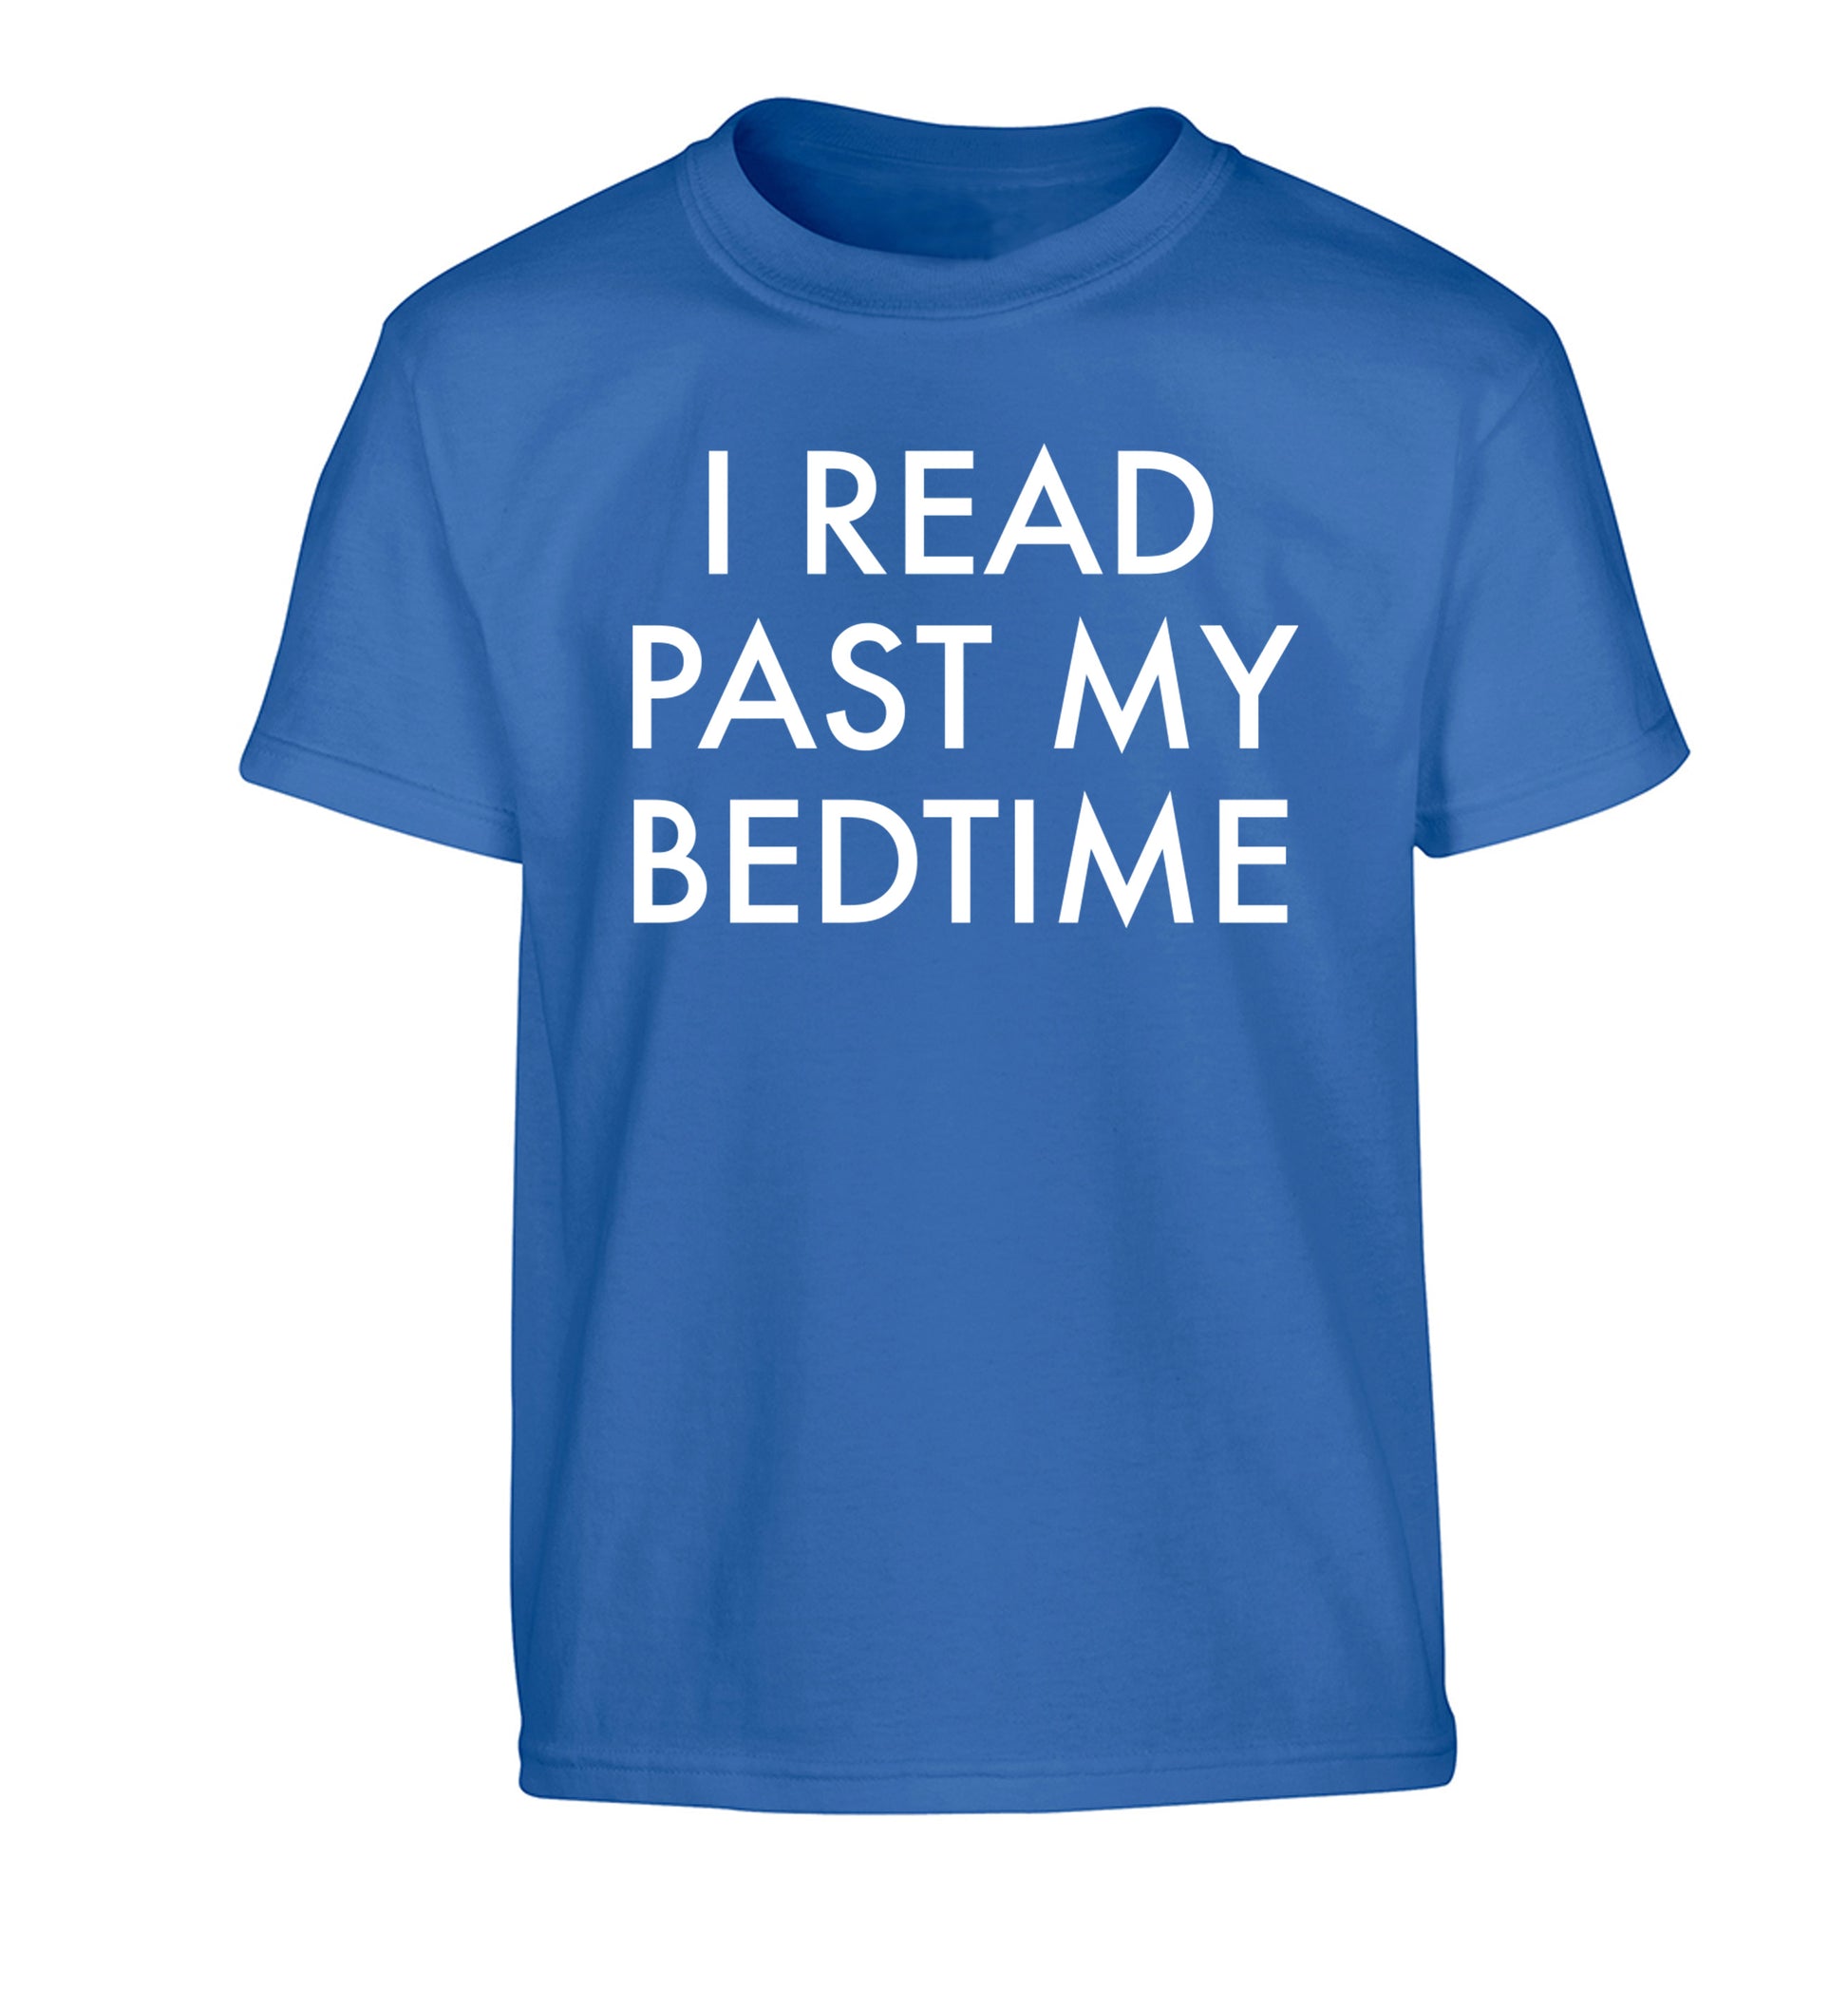 I read past my bedtime Children's blue Tshirt 12-14 Years